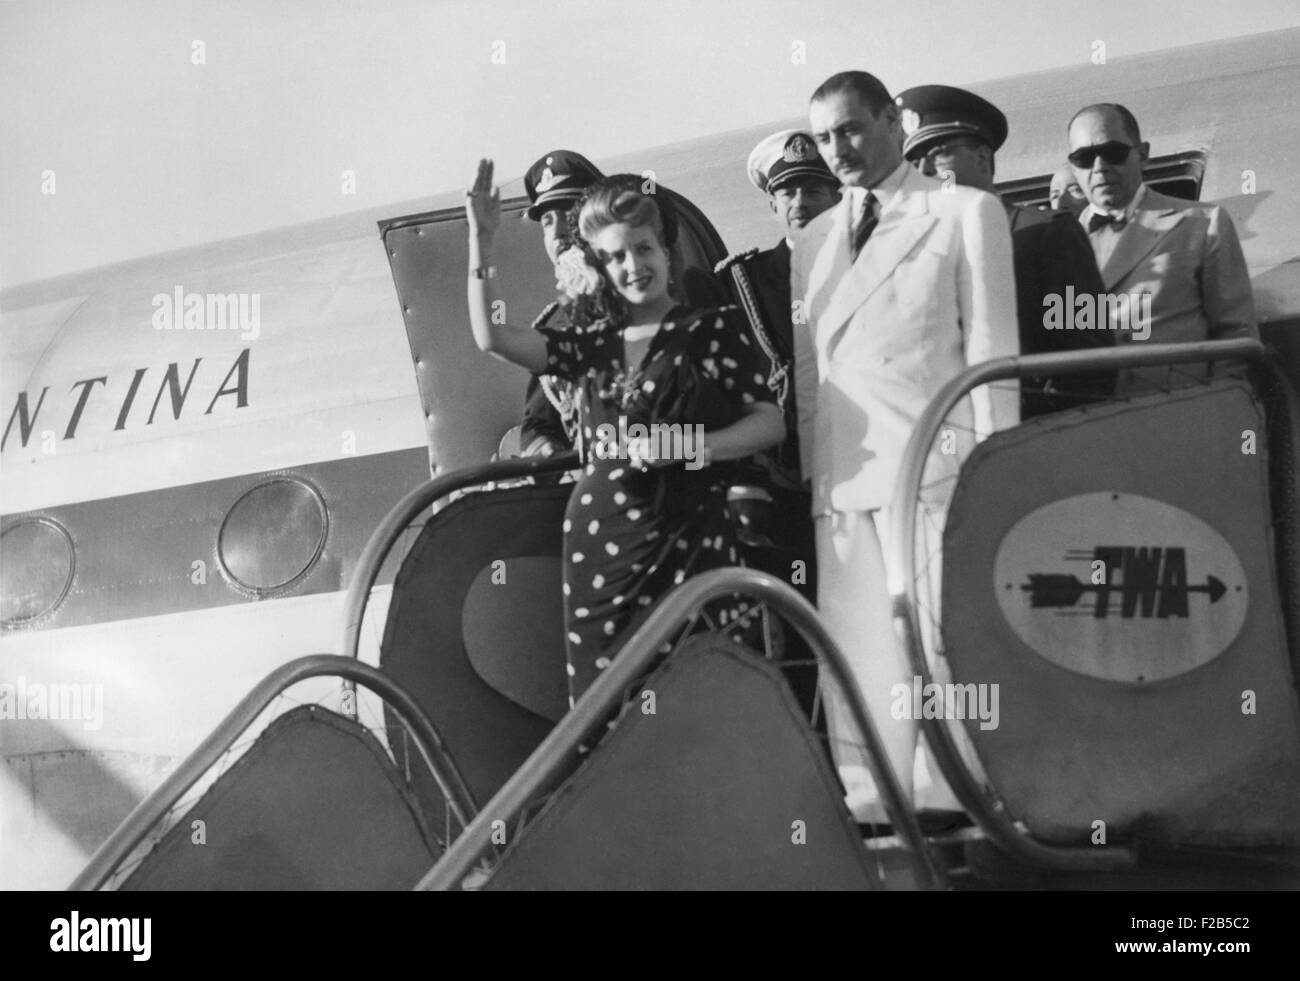 Evita Peron, arriving in Rome on June 26, 1947. She is escorted by her brother Juancito Duarte. - (BSLOC 2014 17 68) Stock Photo